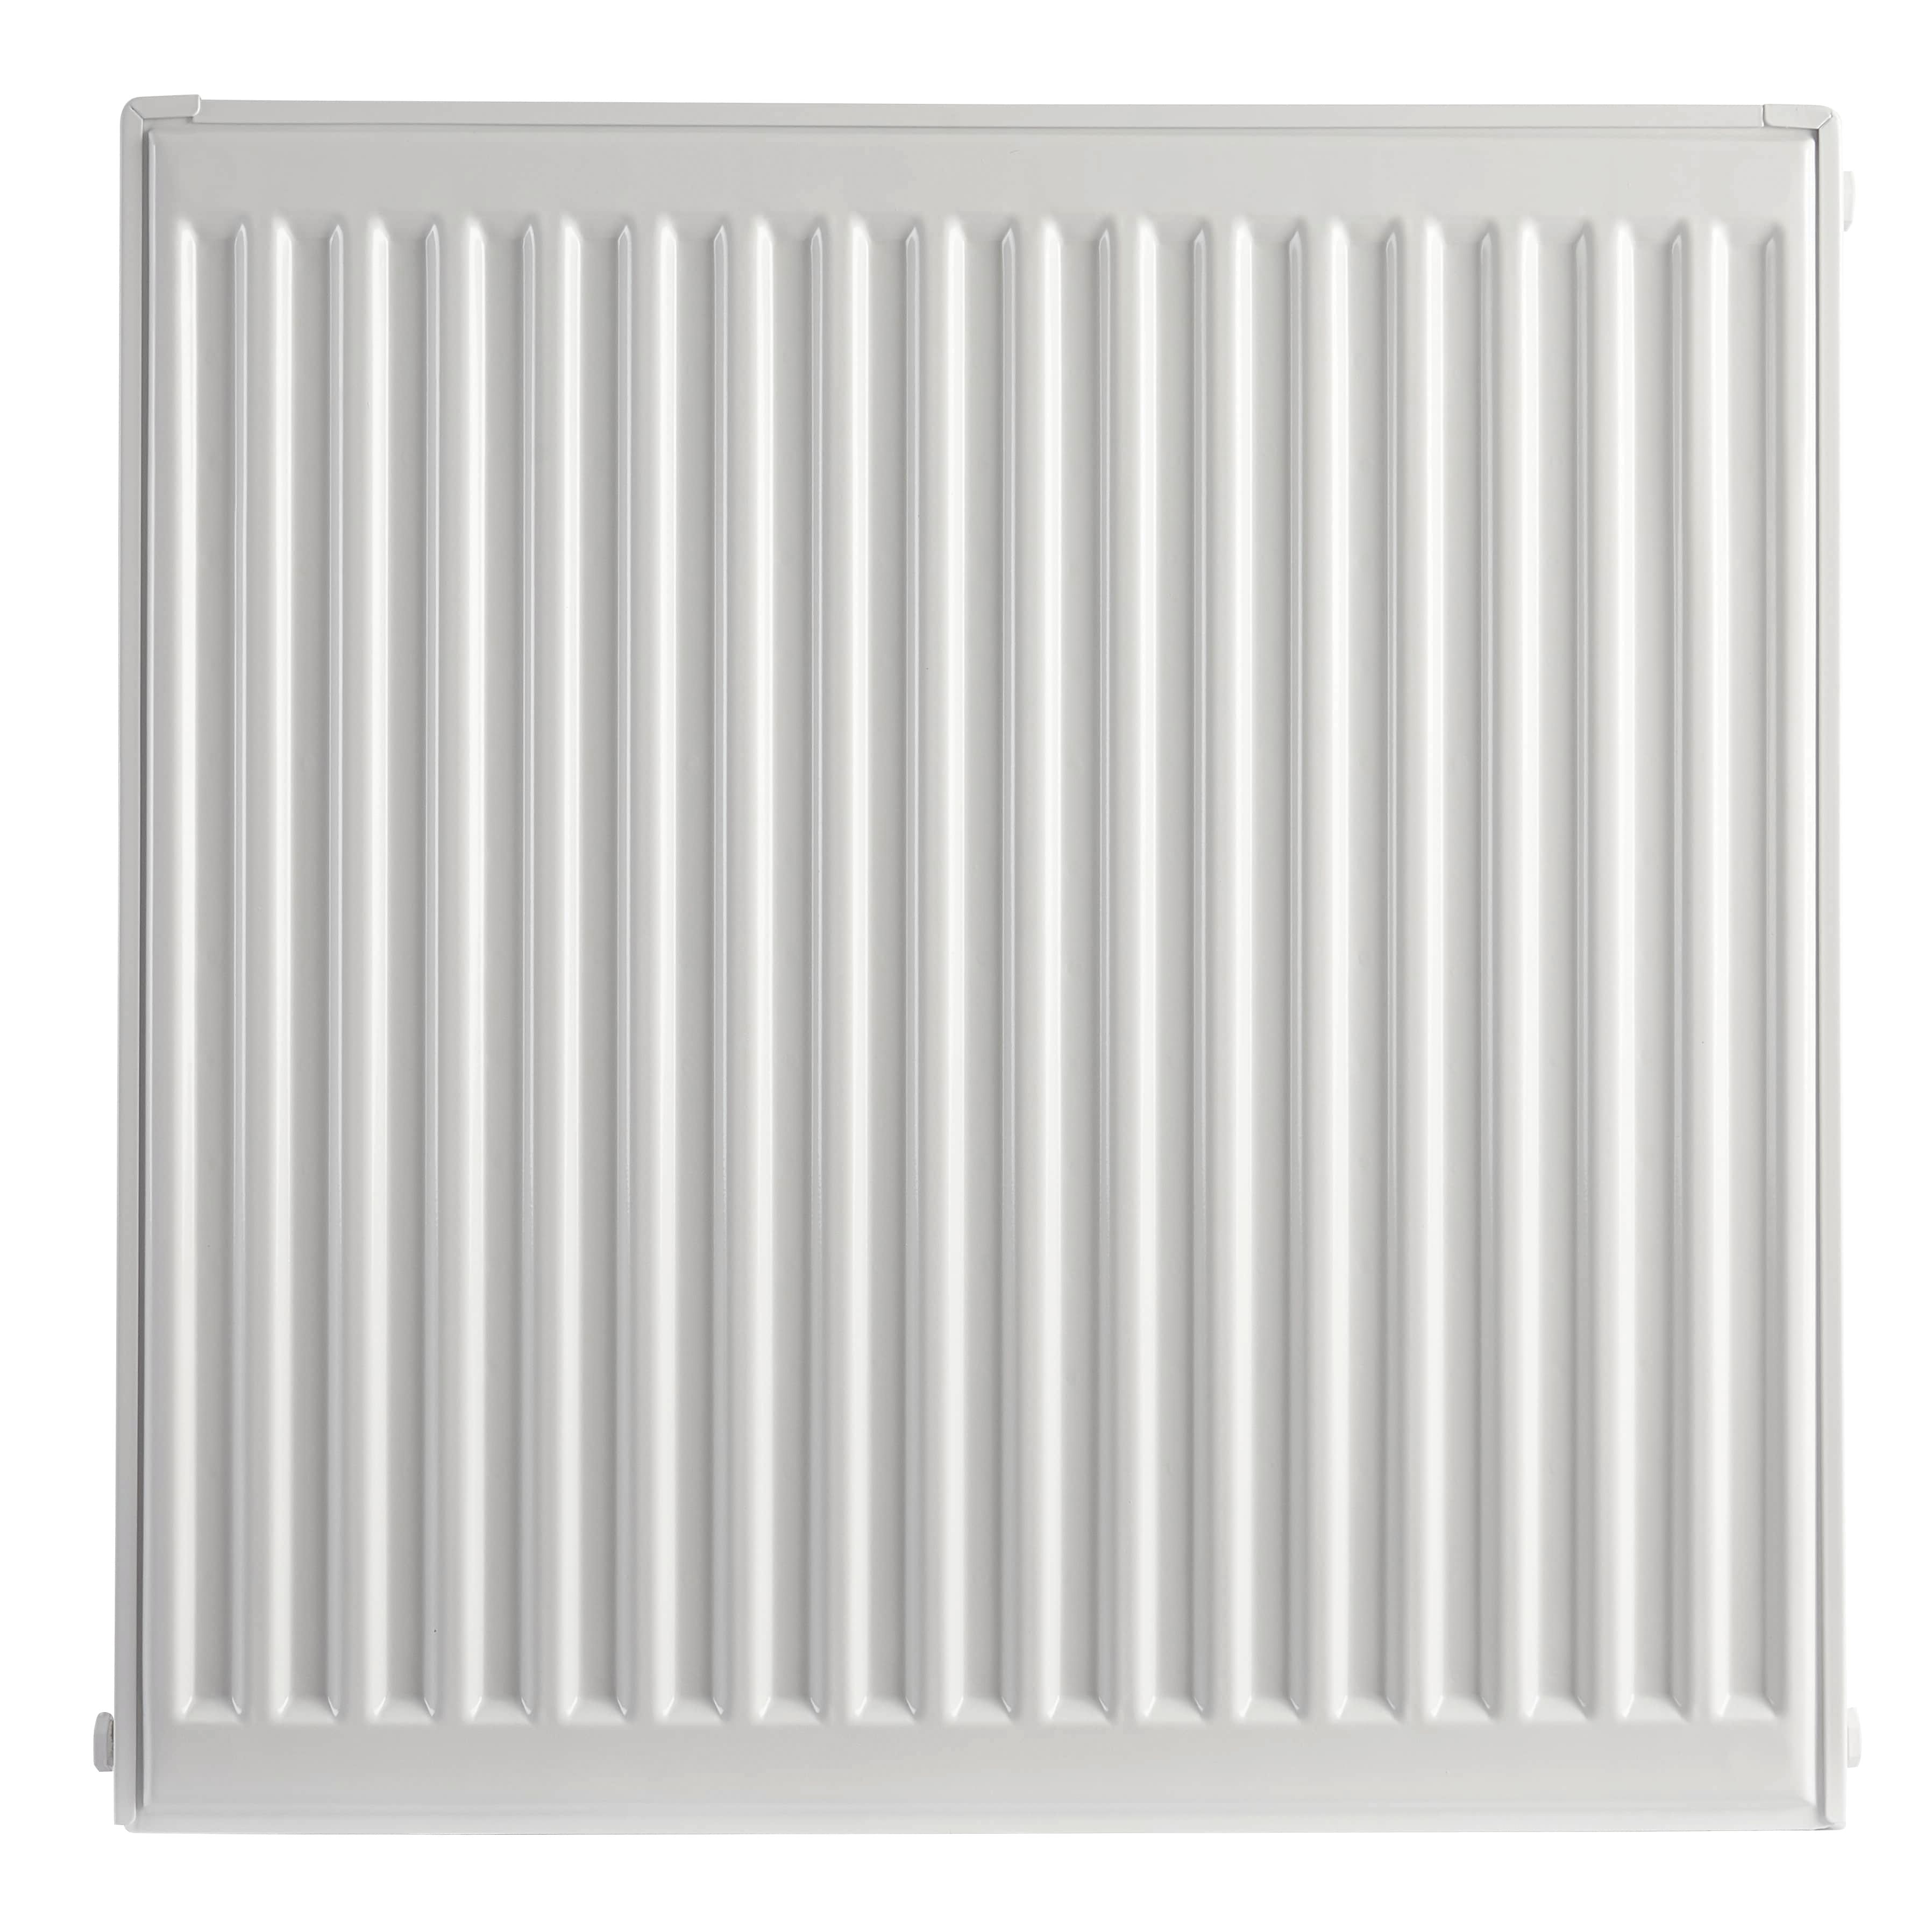 Image of Homeline by Stelrad 500 x 500mm Type 22 Double Panel Premium Double Convector Radiator